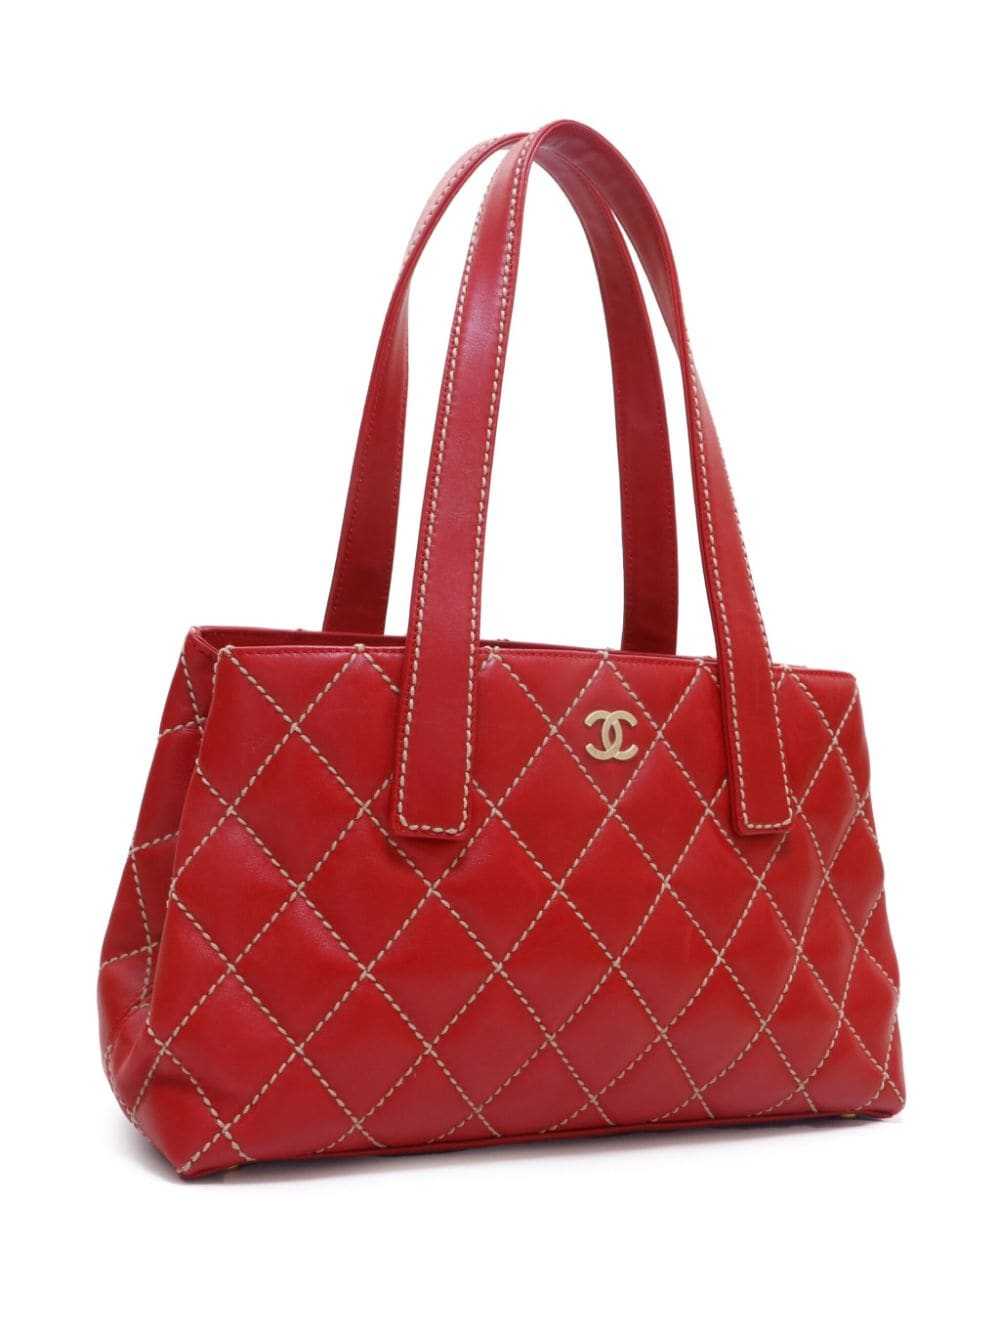 CHANEL Pre-Owned 2002 Wild Stitch tote bag - Red - image 3